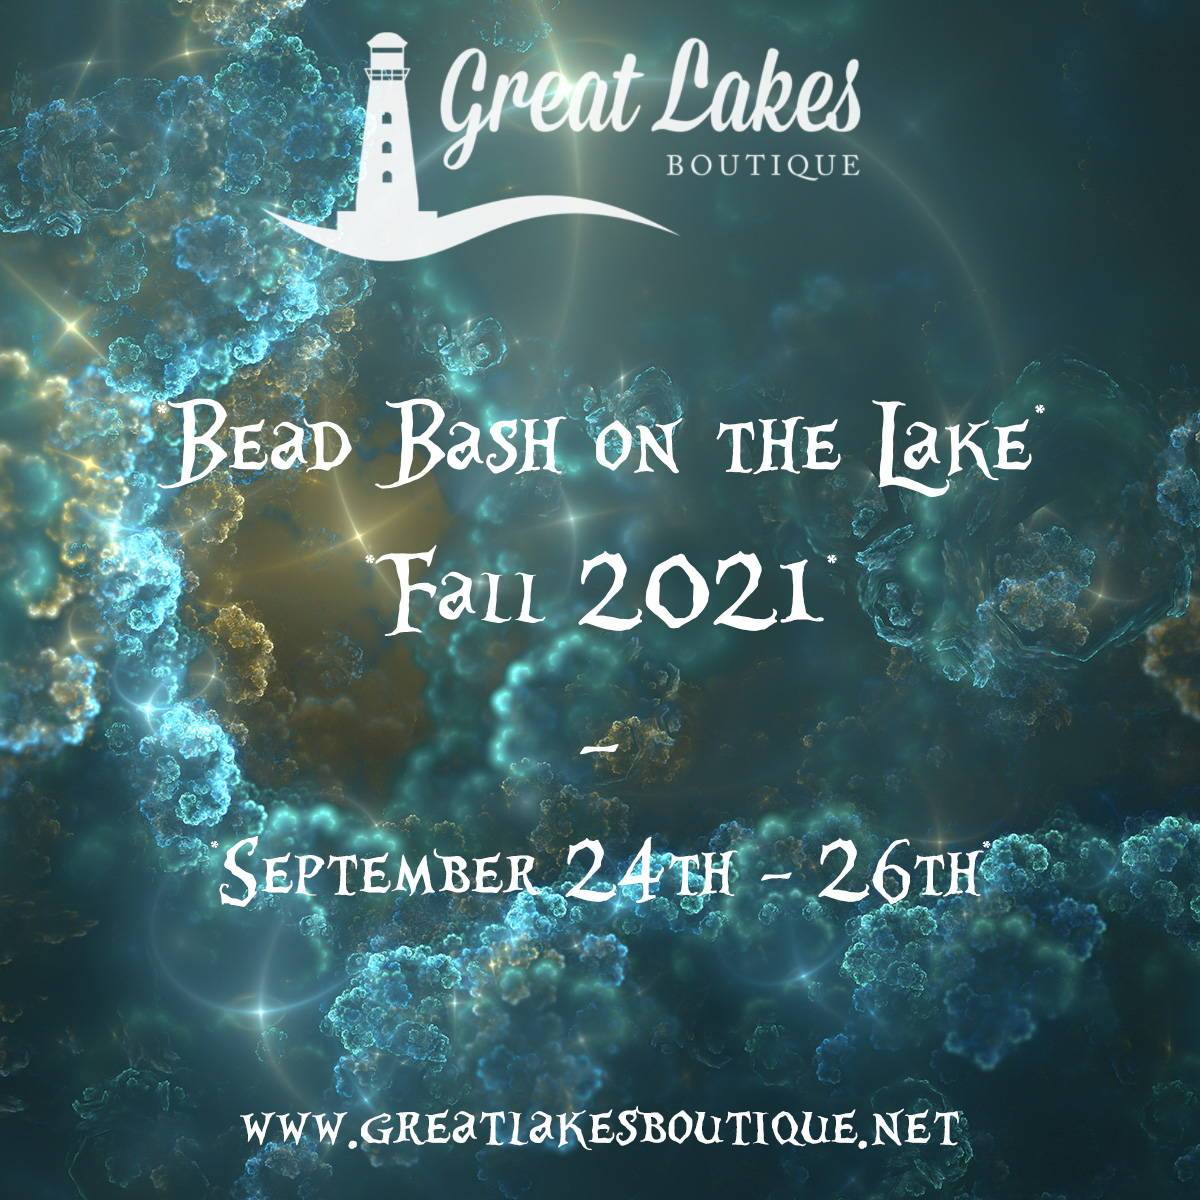 Great Lakes Boutique Bead Bash on the Lake Fall 2021